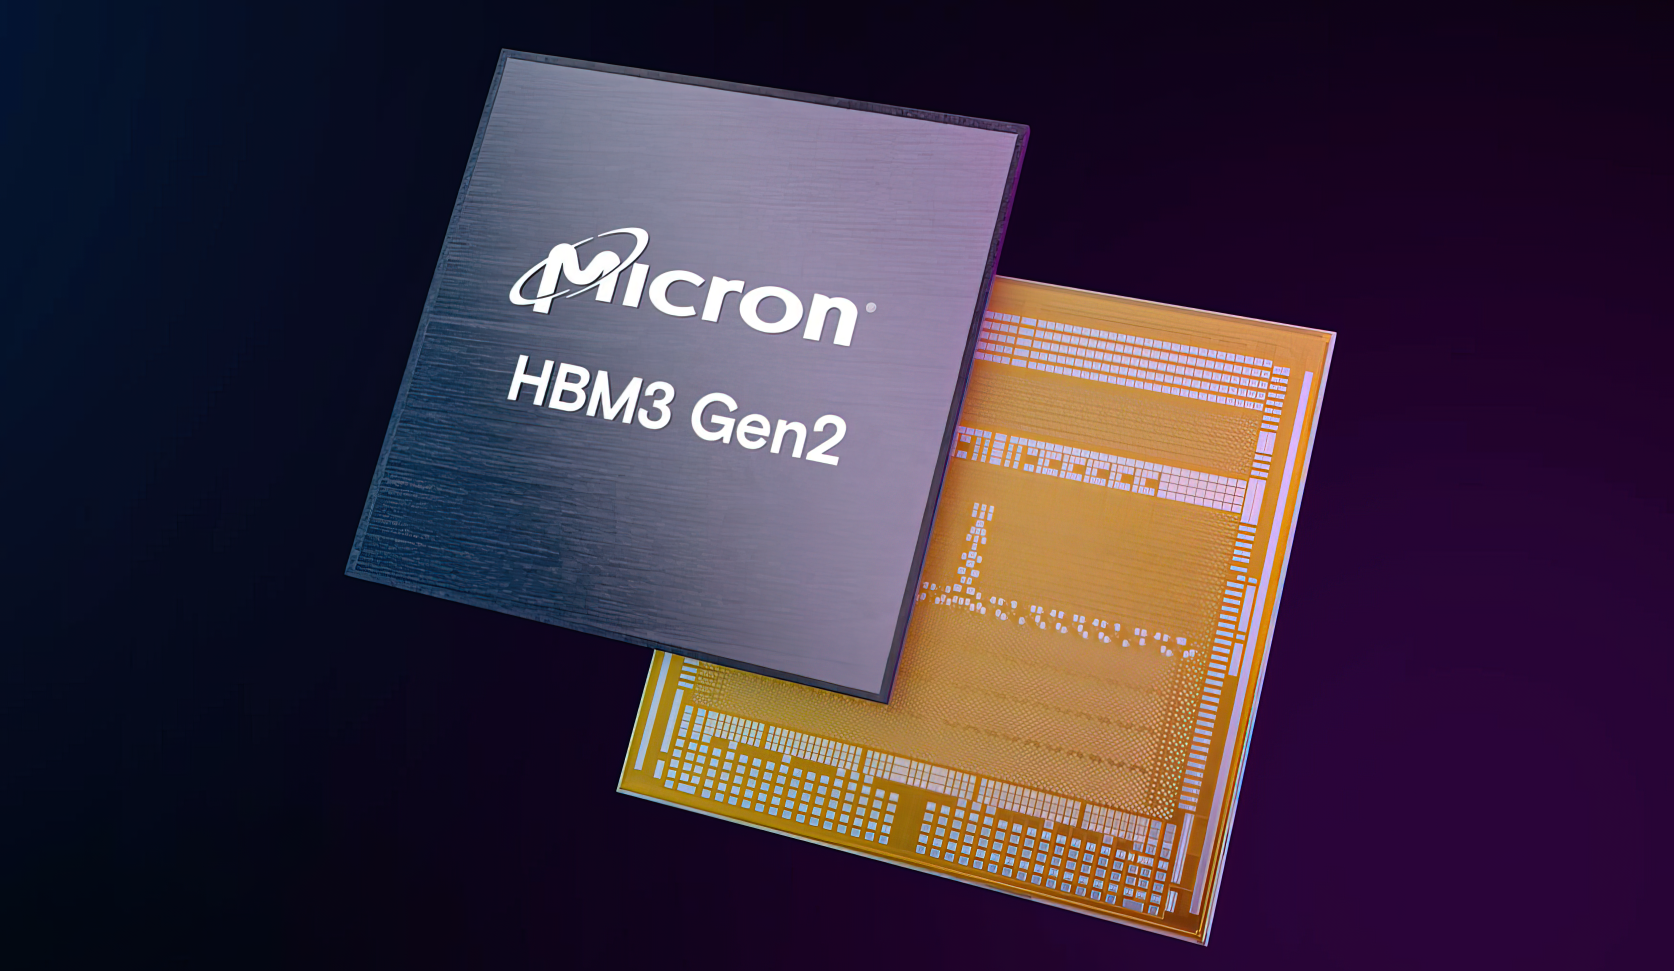 Micron Technology wants a larger piece of the HBM market share